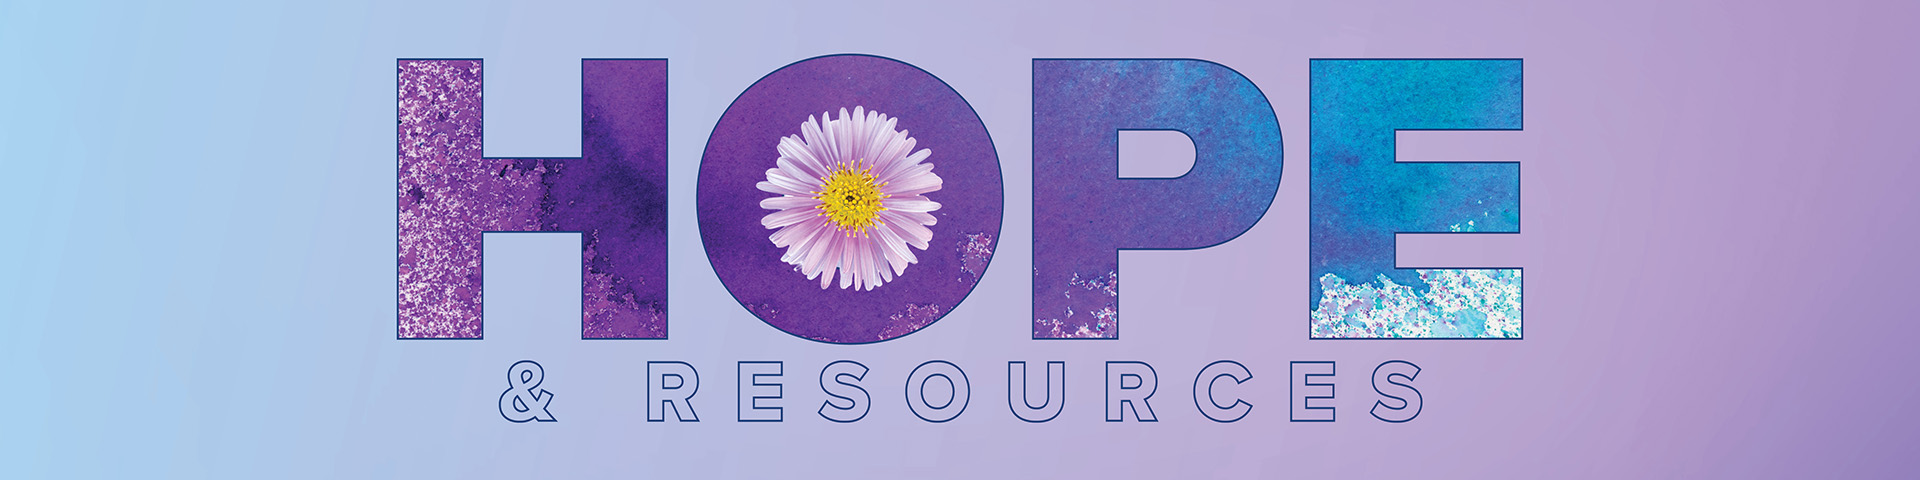 The words "HOPE and resources" with a purple daisy on a blue and purple background